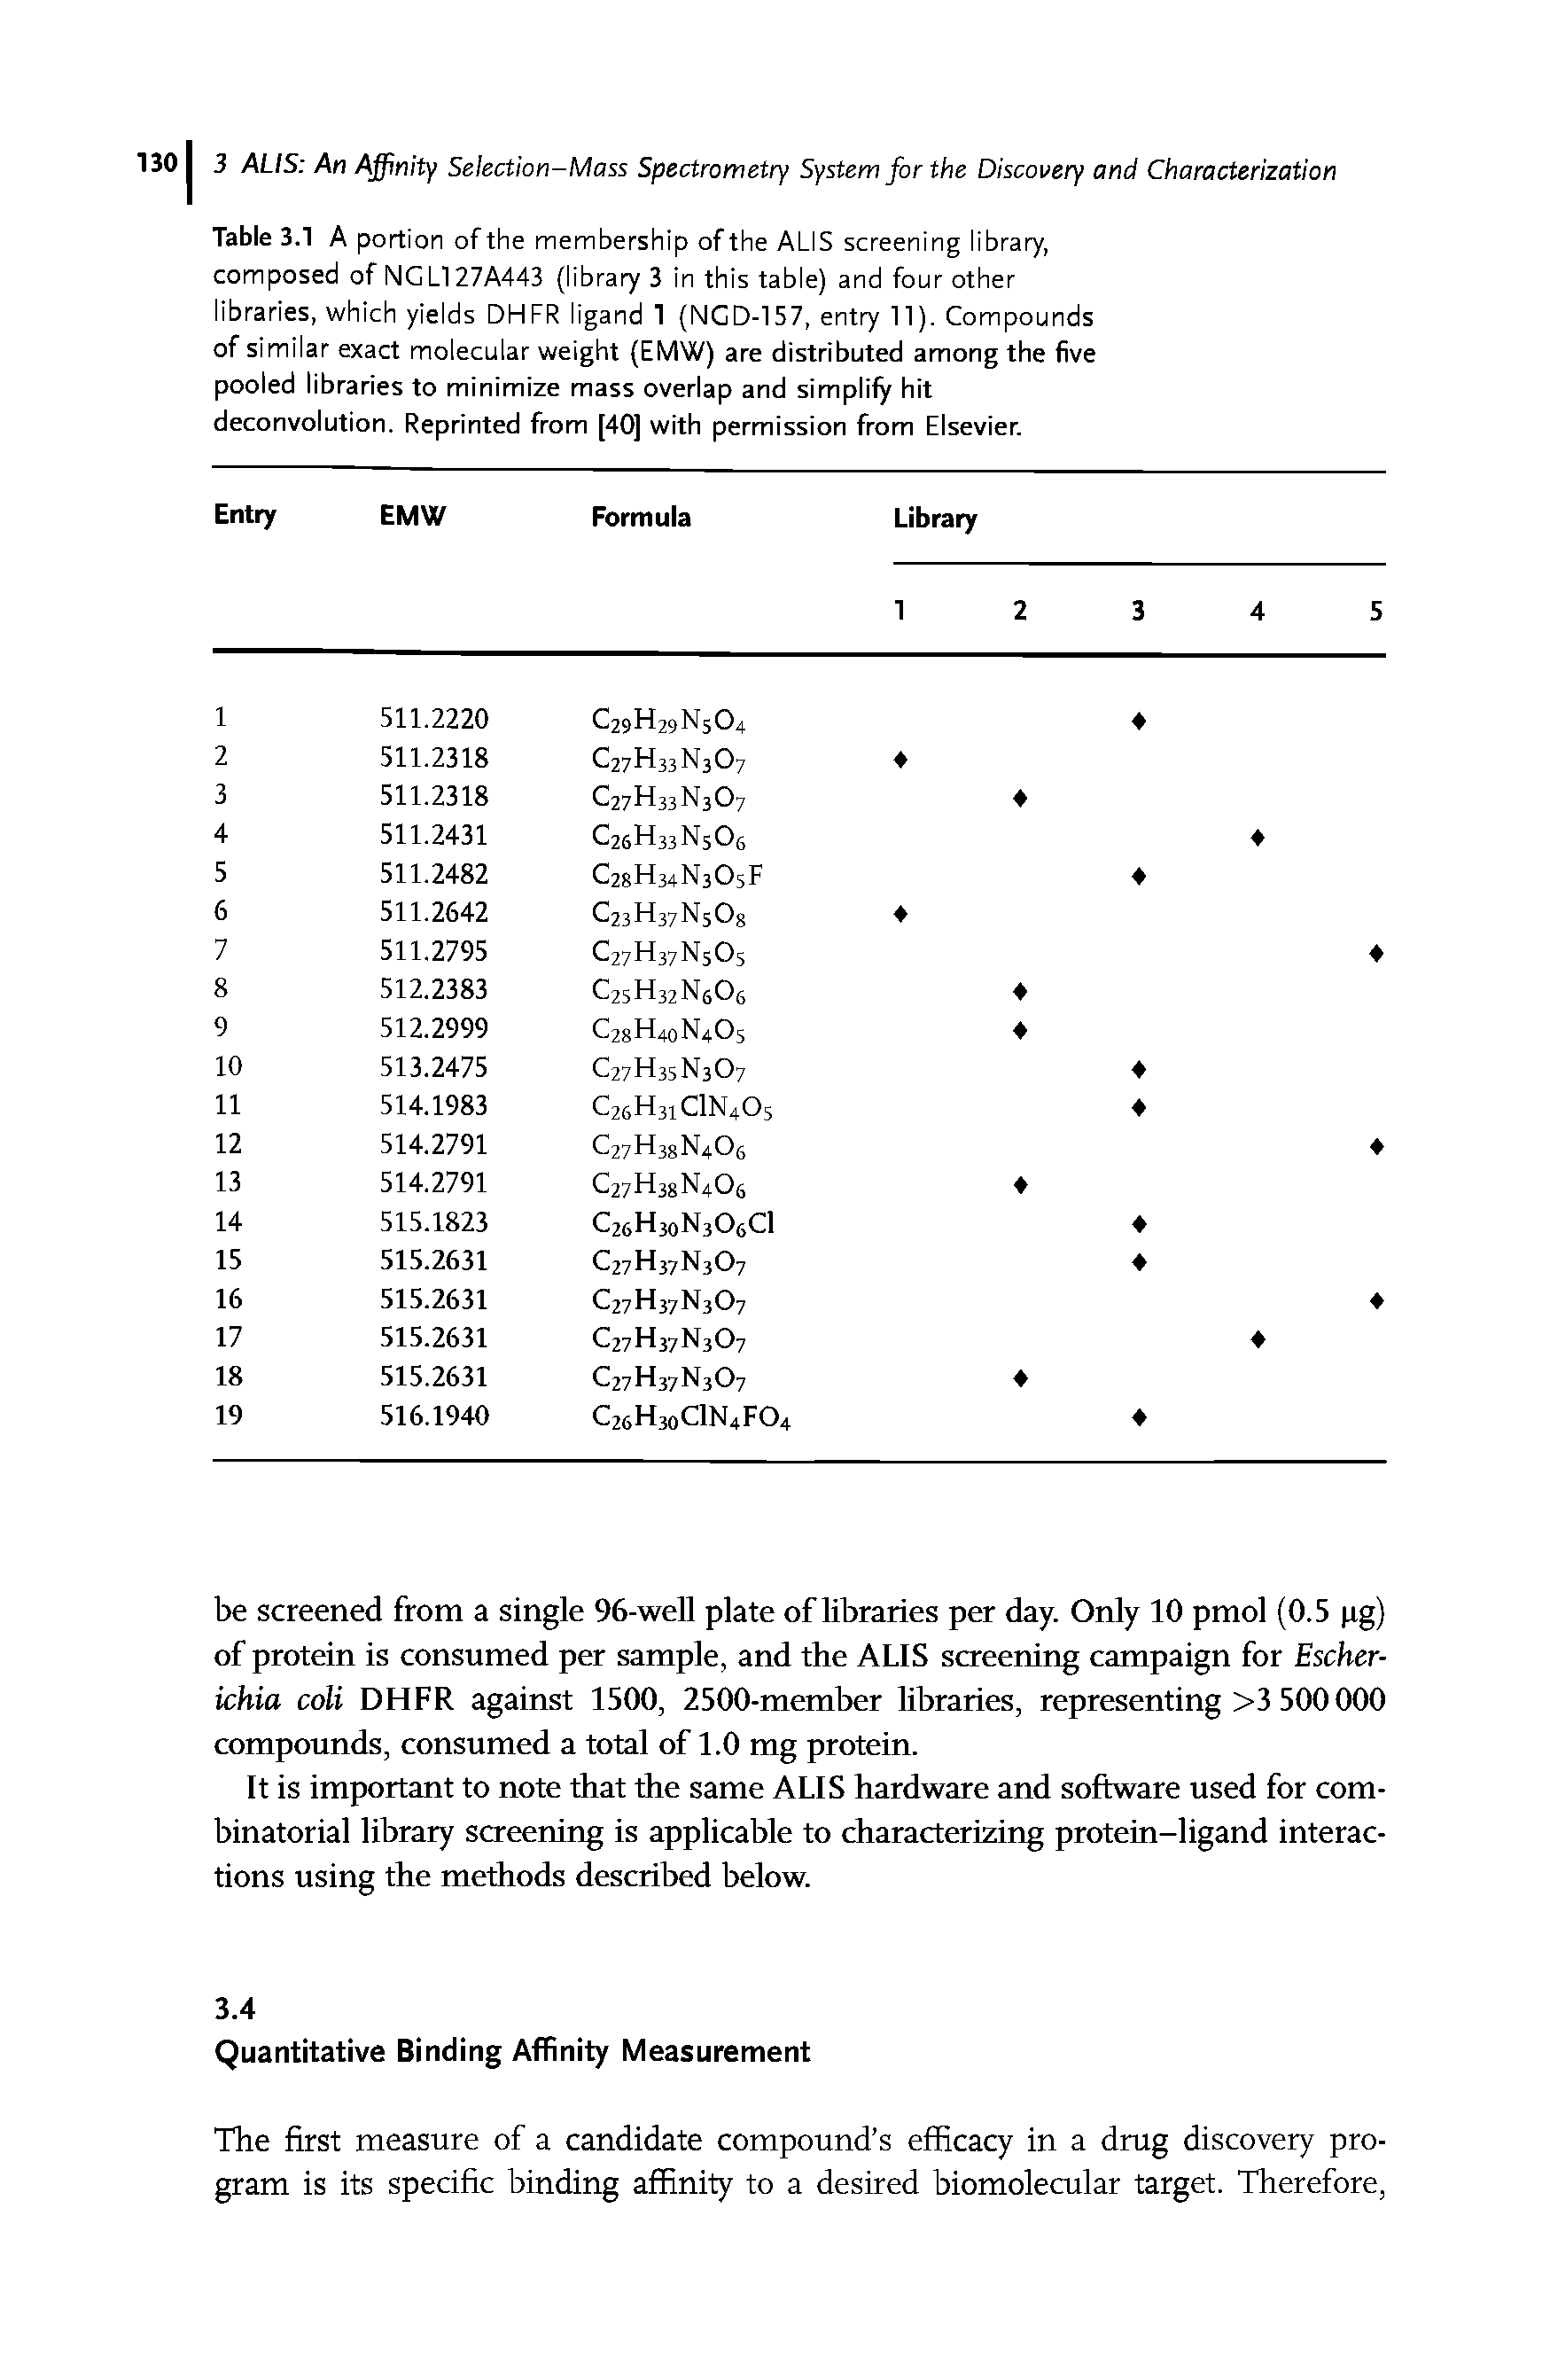 Table 3.1 A portion of the membership of the ALIS screening library, composed of NG LI 27A443 (library 3 in this table) and four other libraries, which yields DHFR ligand 1 (NCD-157, entry 11). Compounds of similar exact molecular weight (EMW) are distributed among the five pooled libraries to minimize mass overlap and simplify hit deconvolution. Reprinted from [40] with permission from Elsevier.